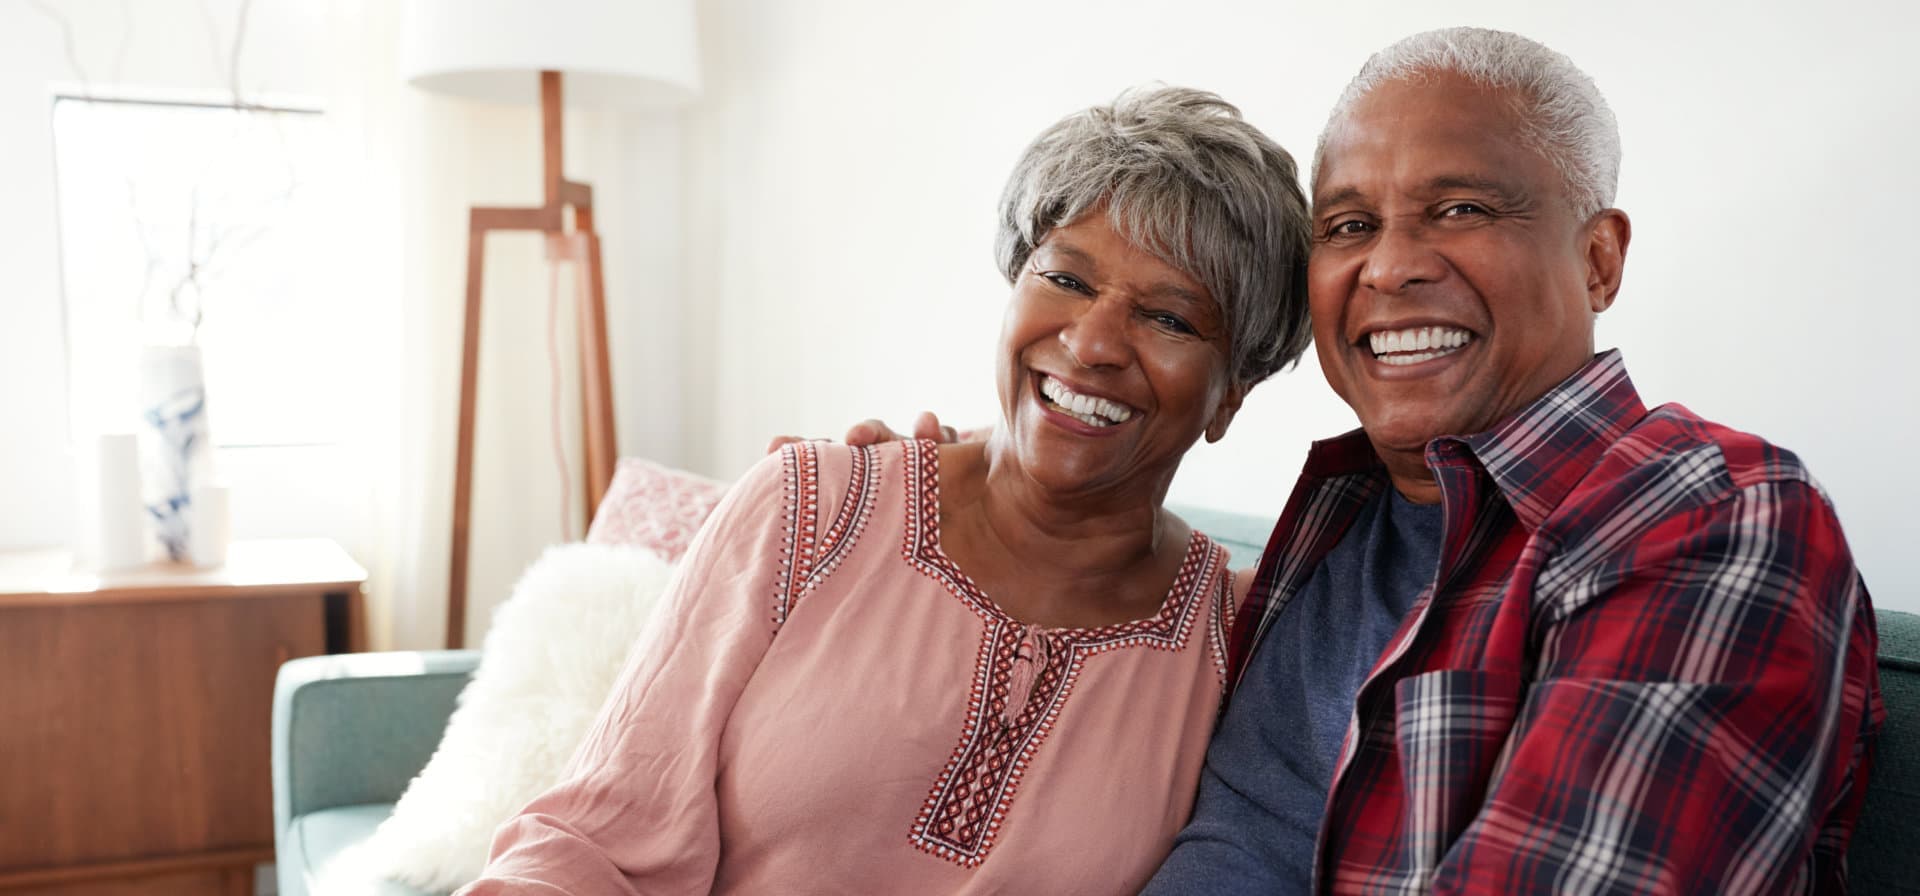 elderly couple hugging while smiling in front of the camera